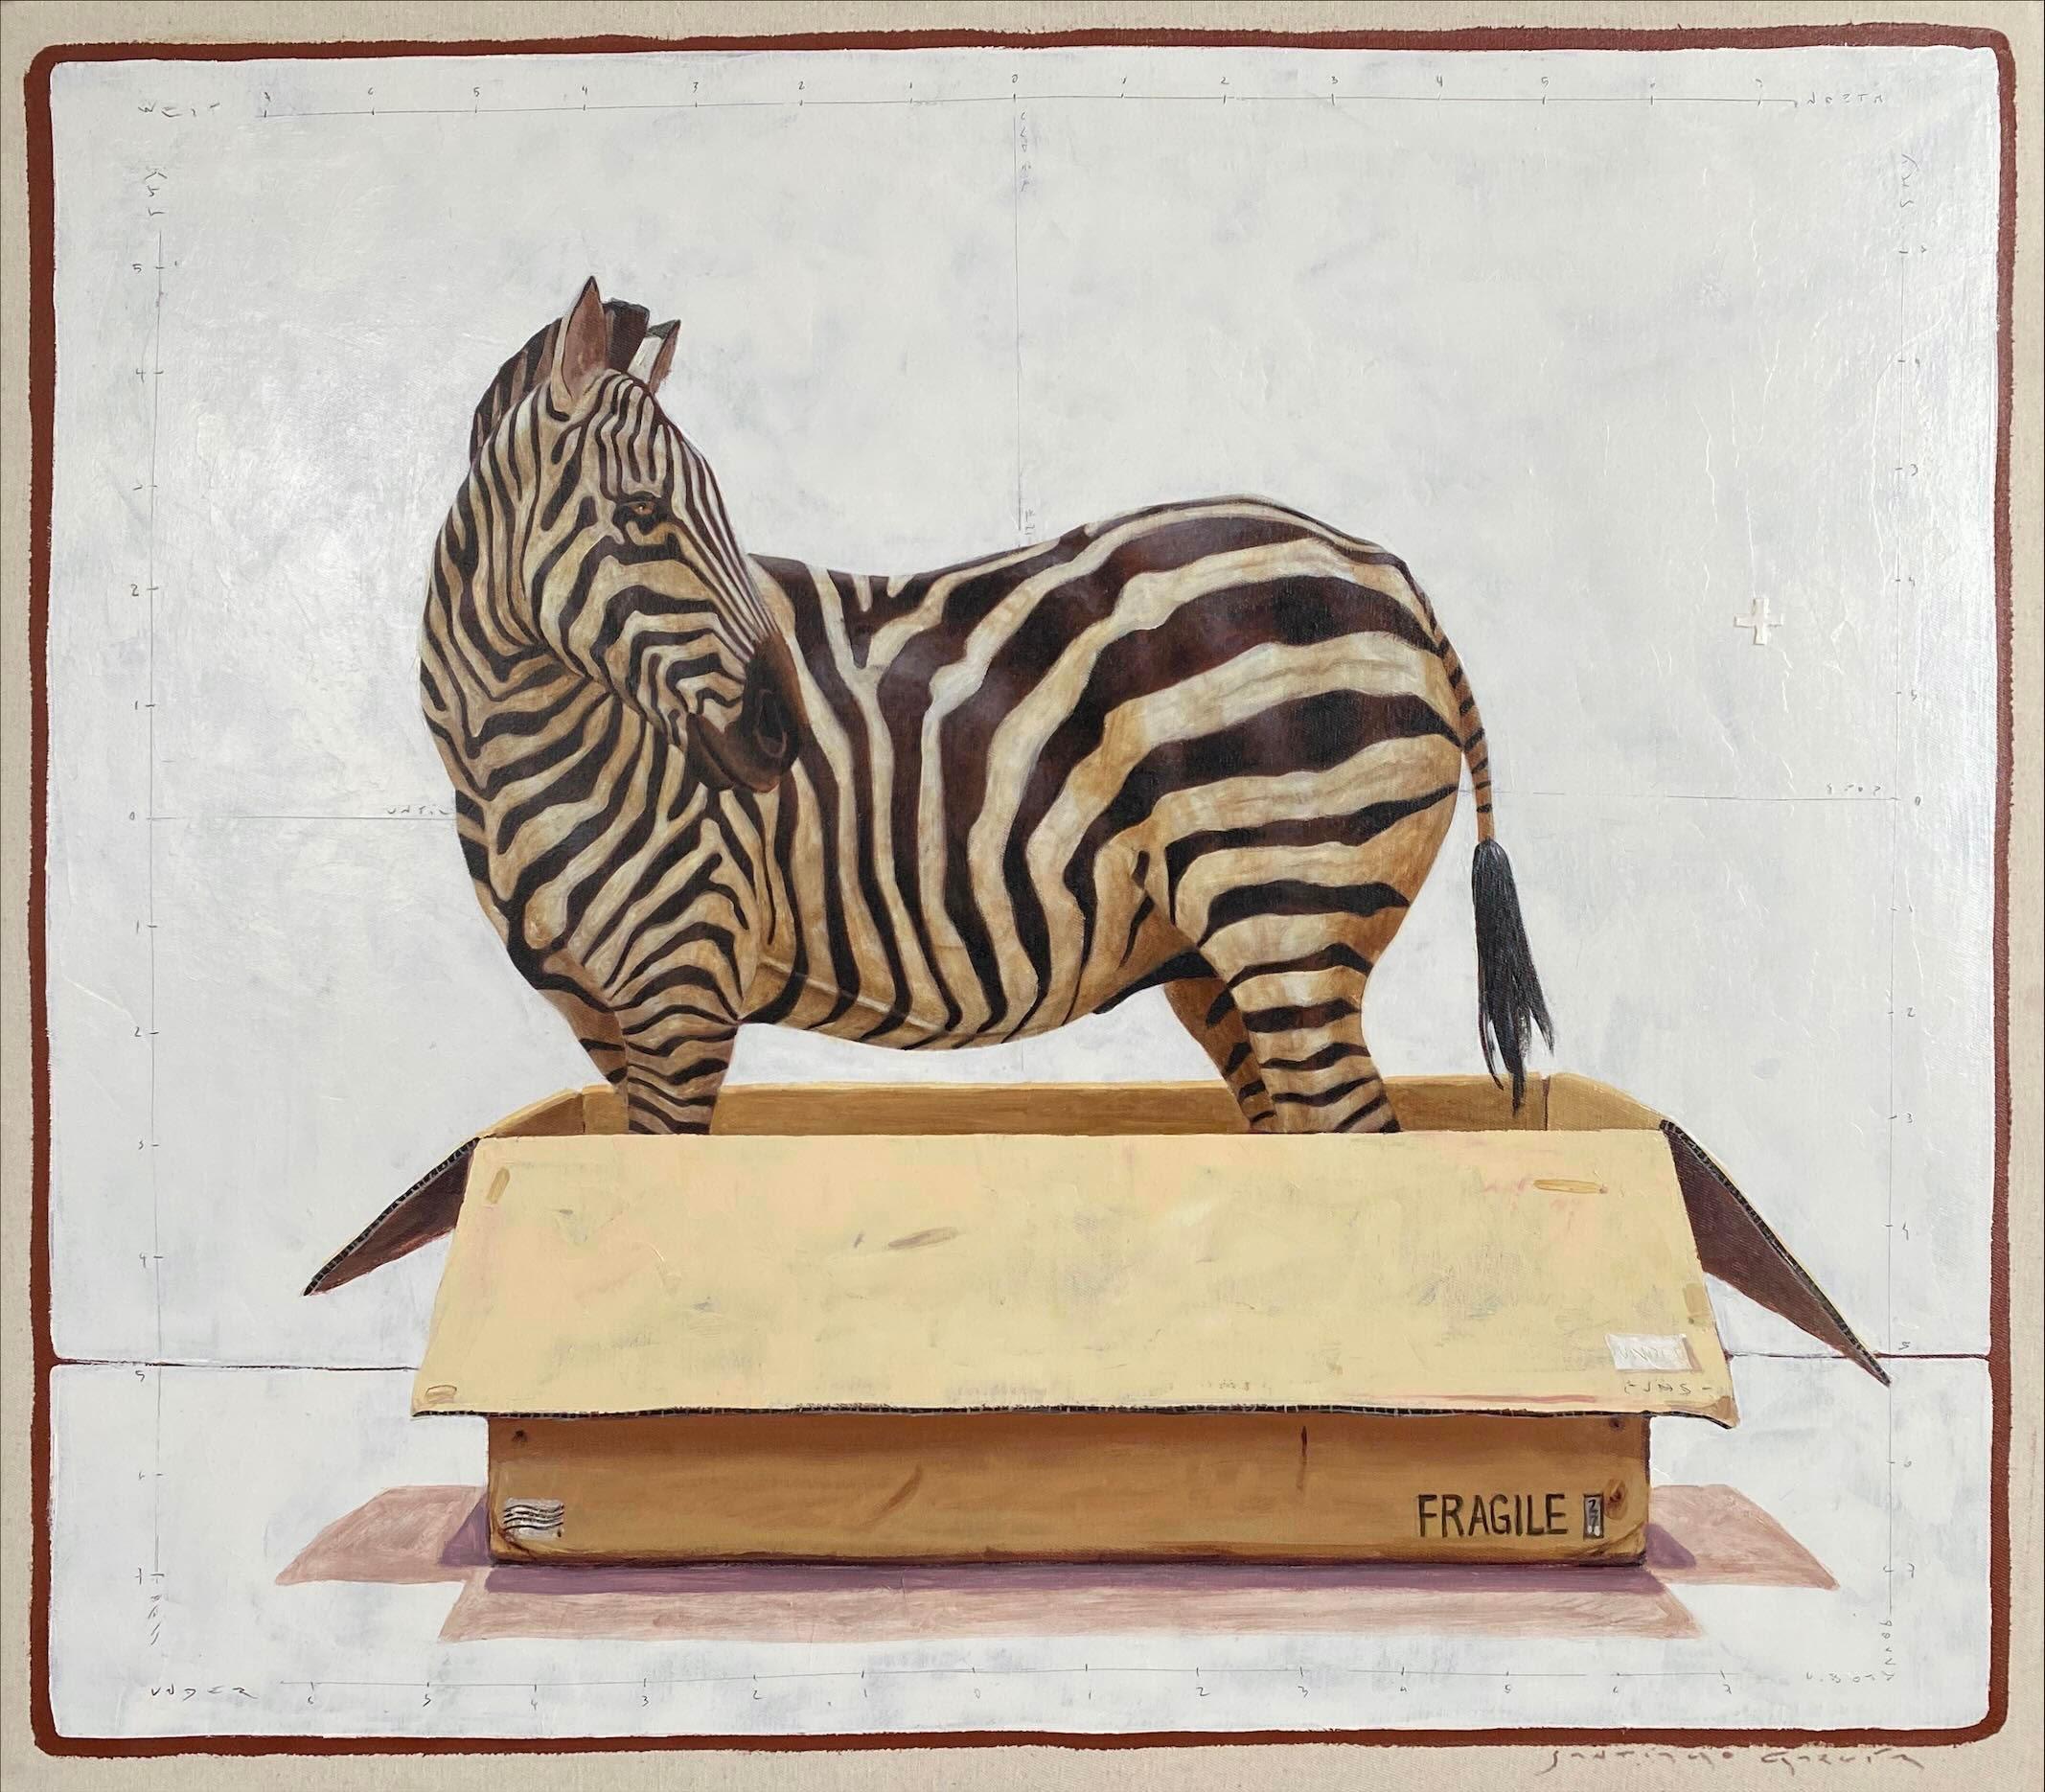 Santiago Garcia Animal Painting - "#1568" acrylic painting of a black and white zebra standing in a cardboard box